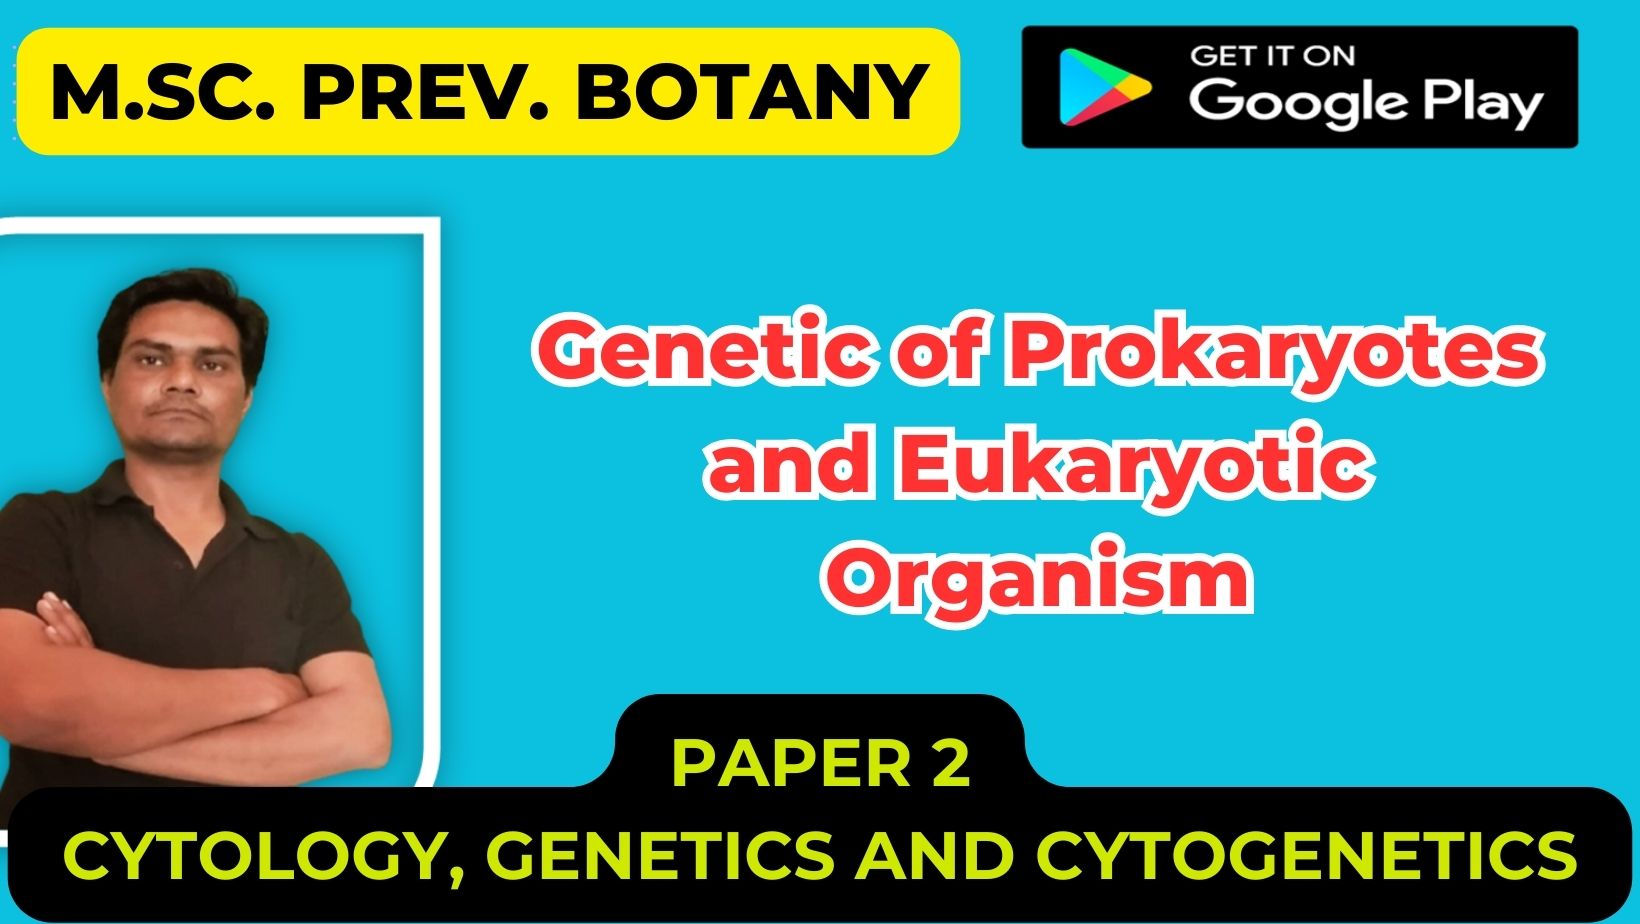 You are currently viewing Genetic of Prokaryotes and Eukaryotic Organism